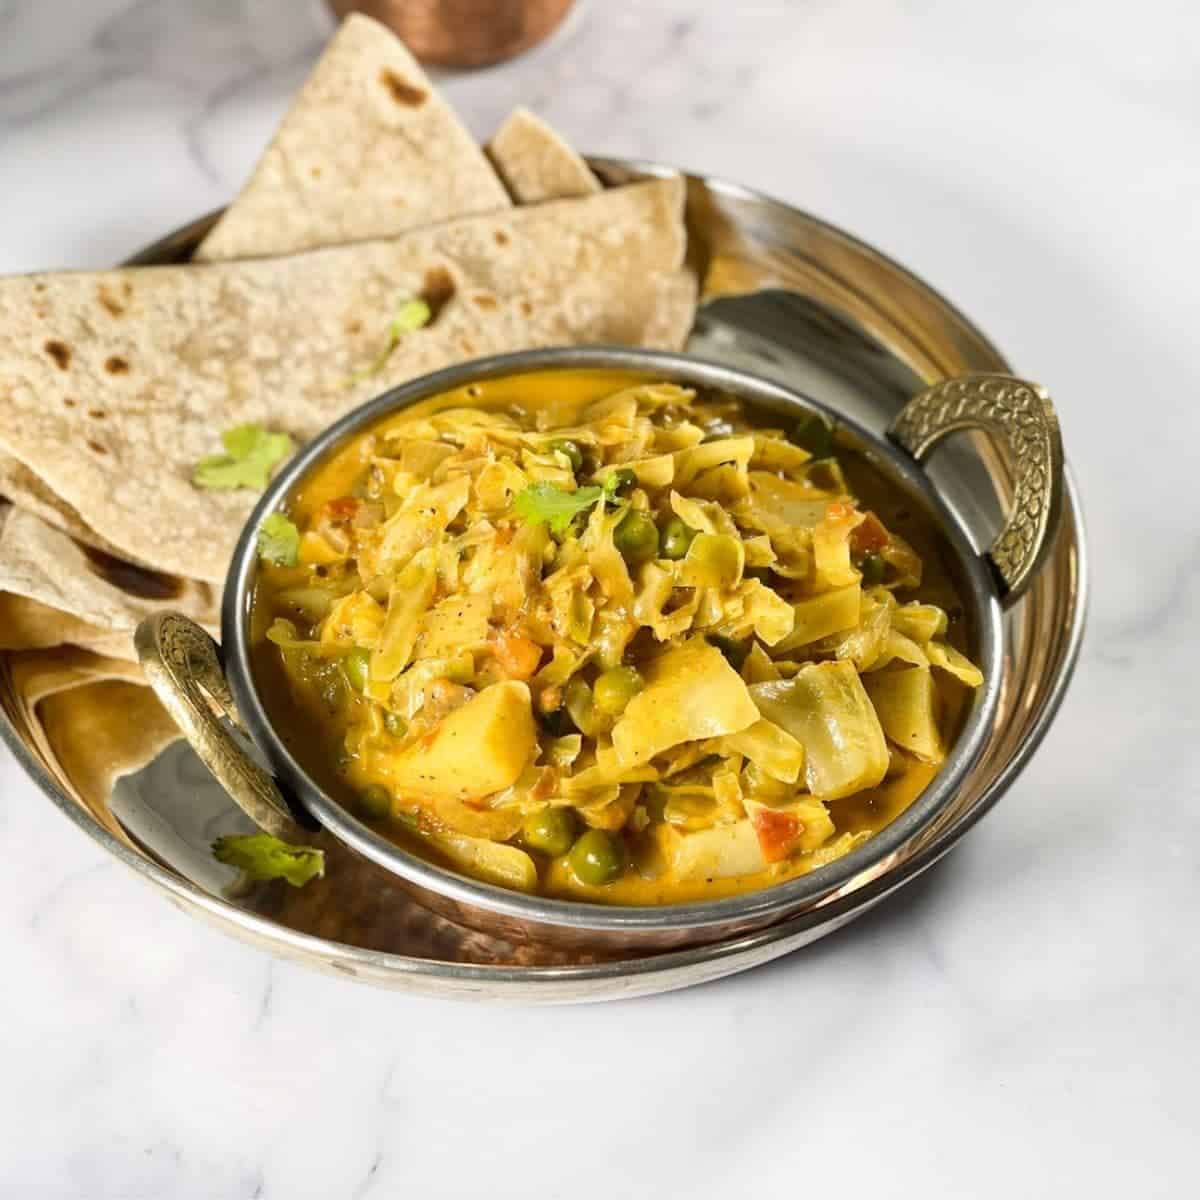 An overhead view of Indian cabbage curry placed in a copper bowl with chapati on the sides.